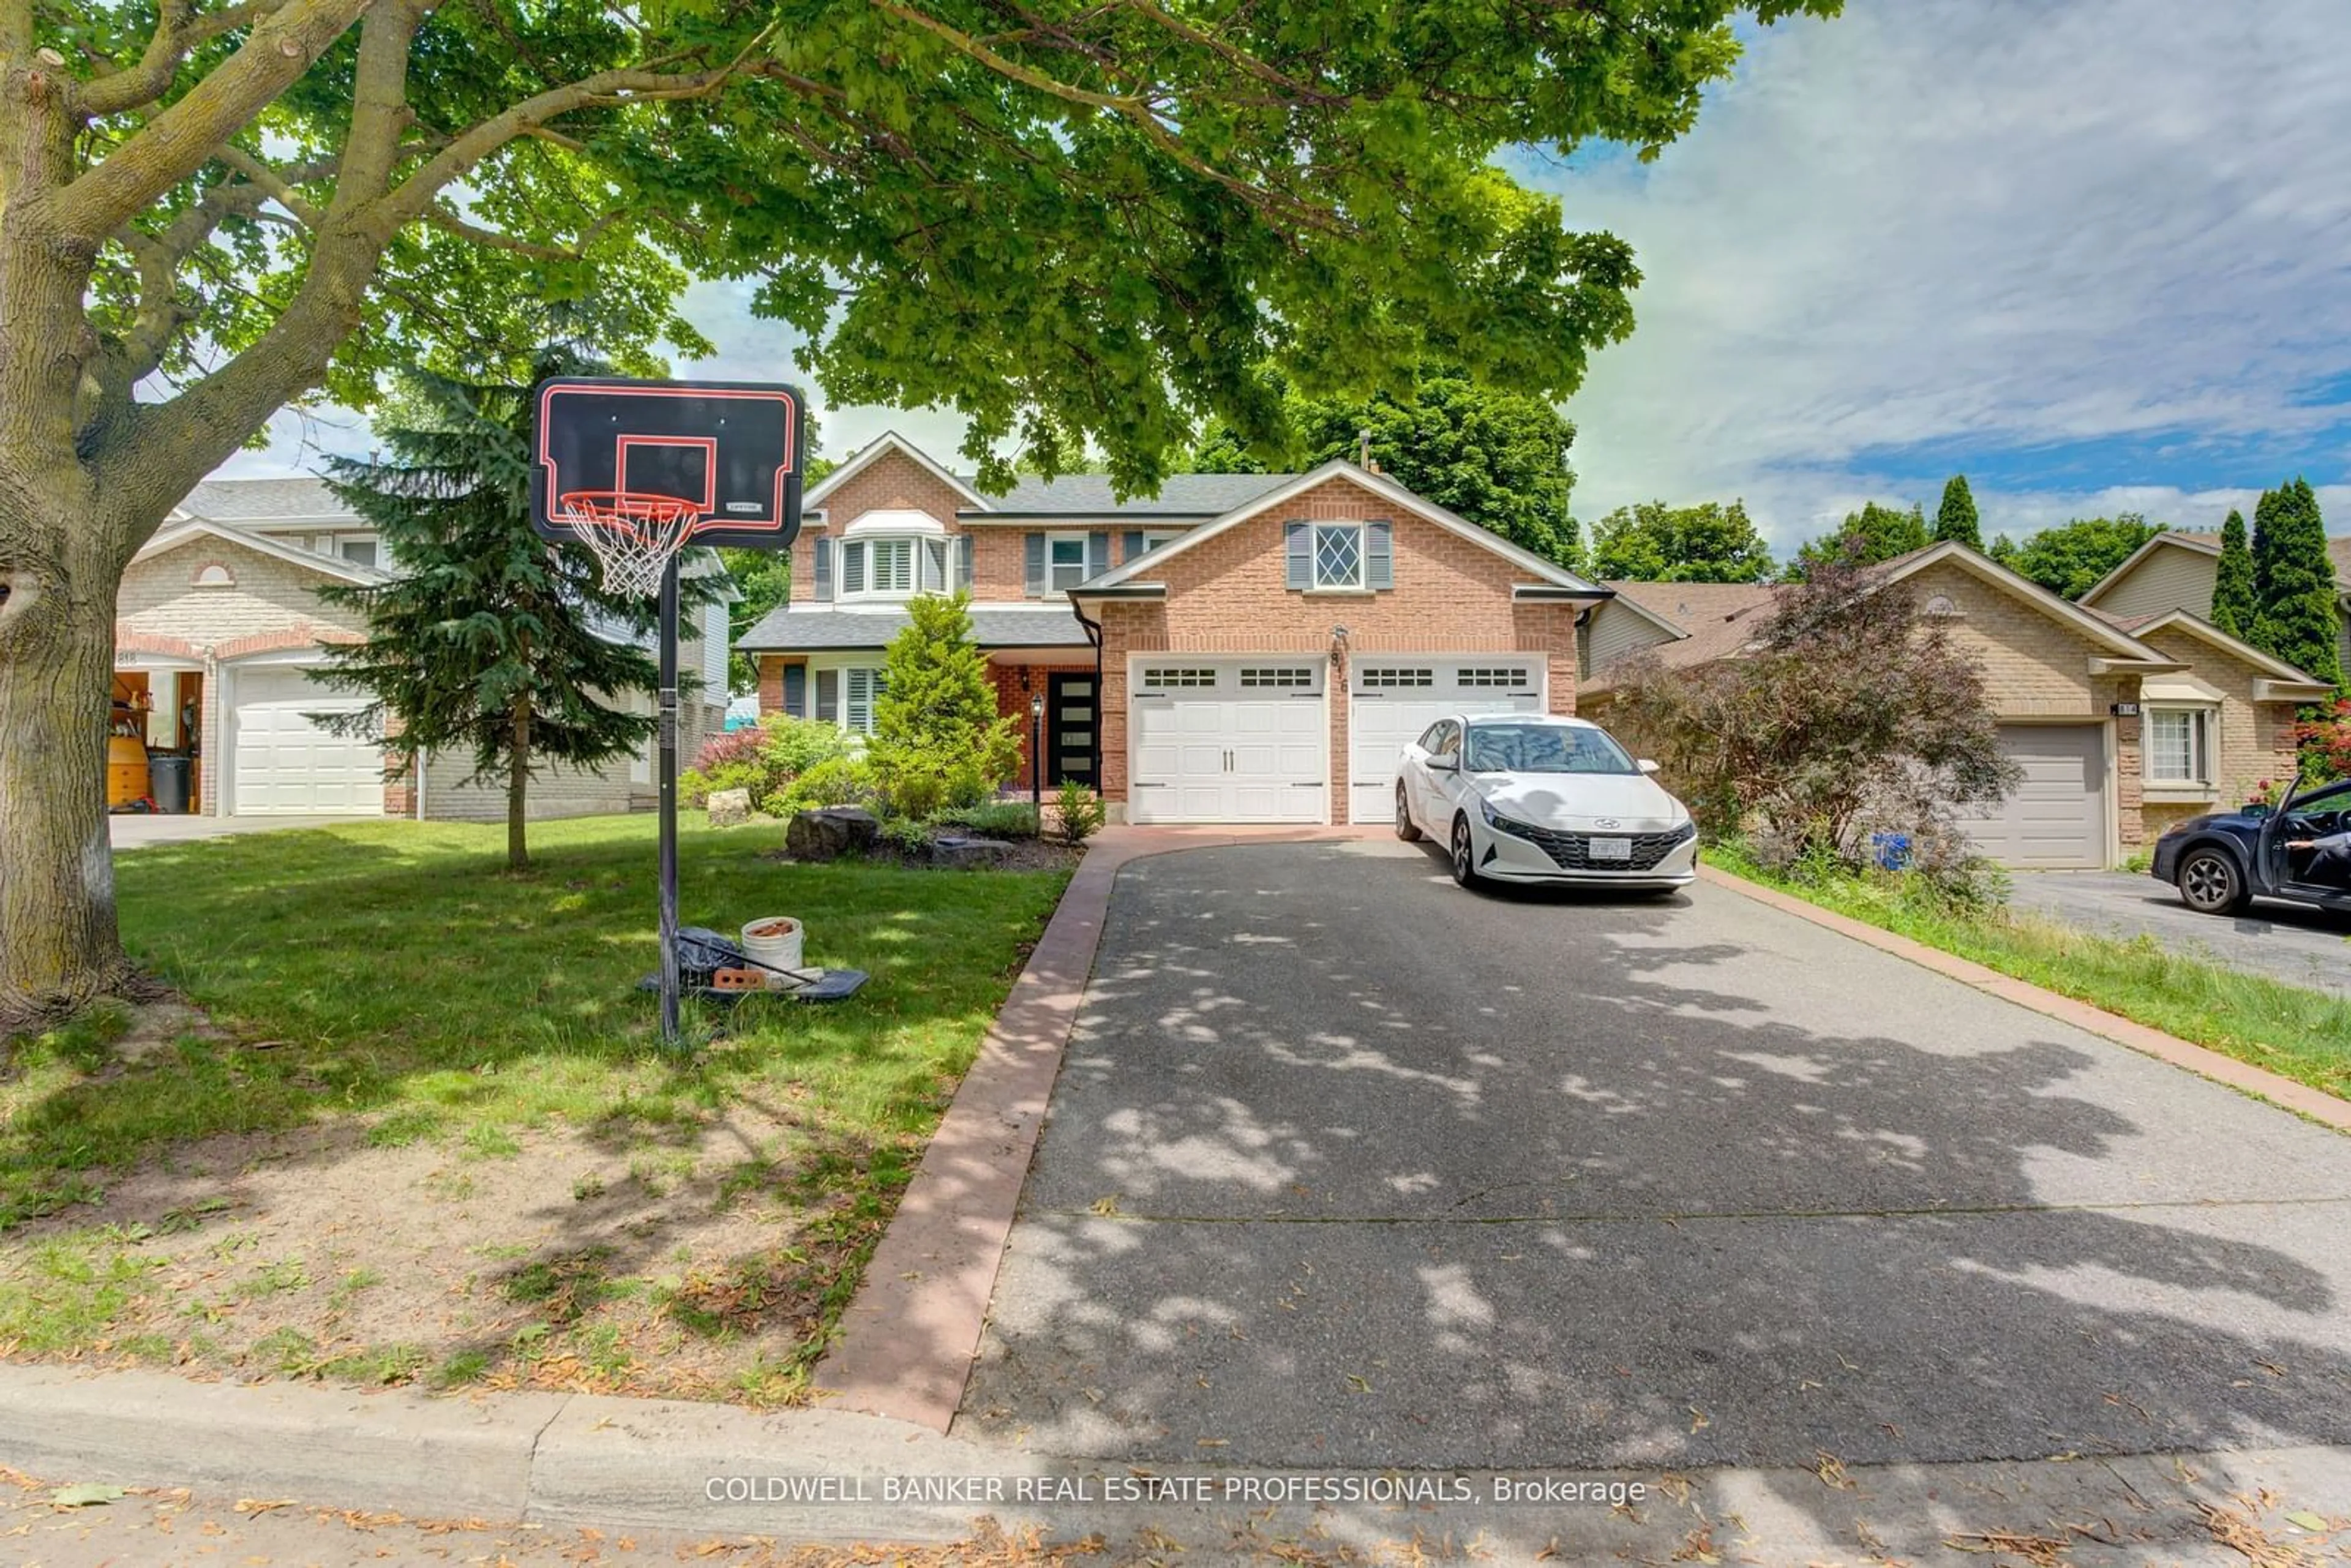 Street view for 816 Ironwood Crt, Whitby Ontario L1N 6S3